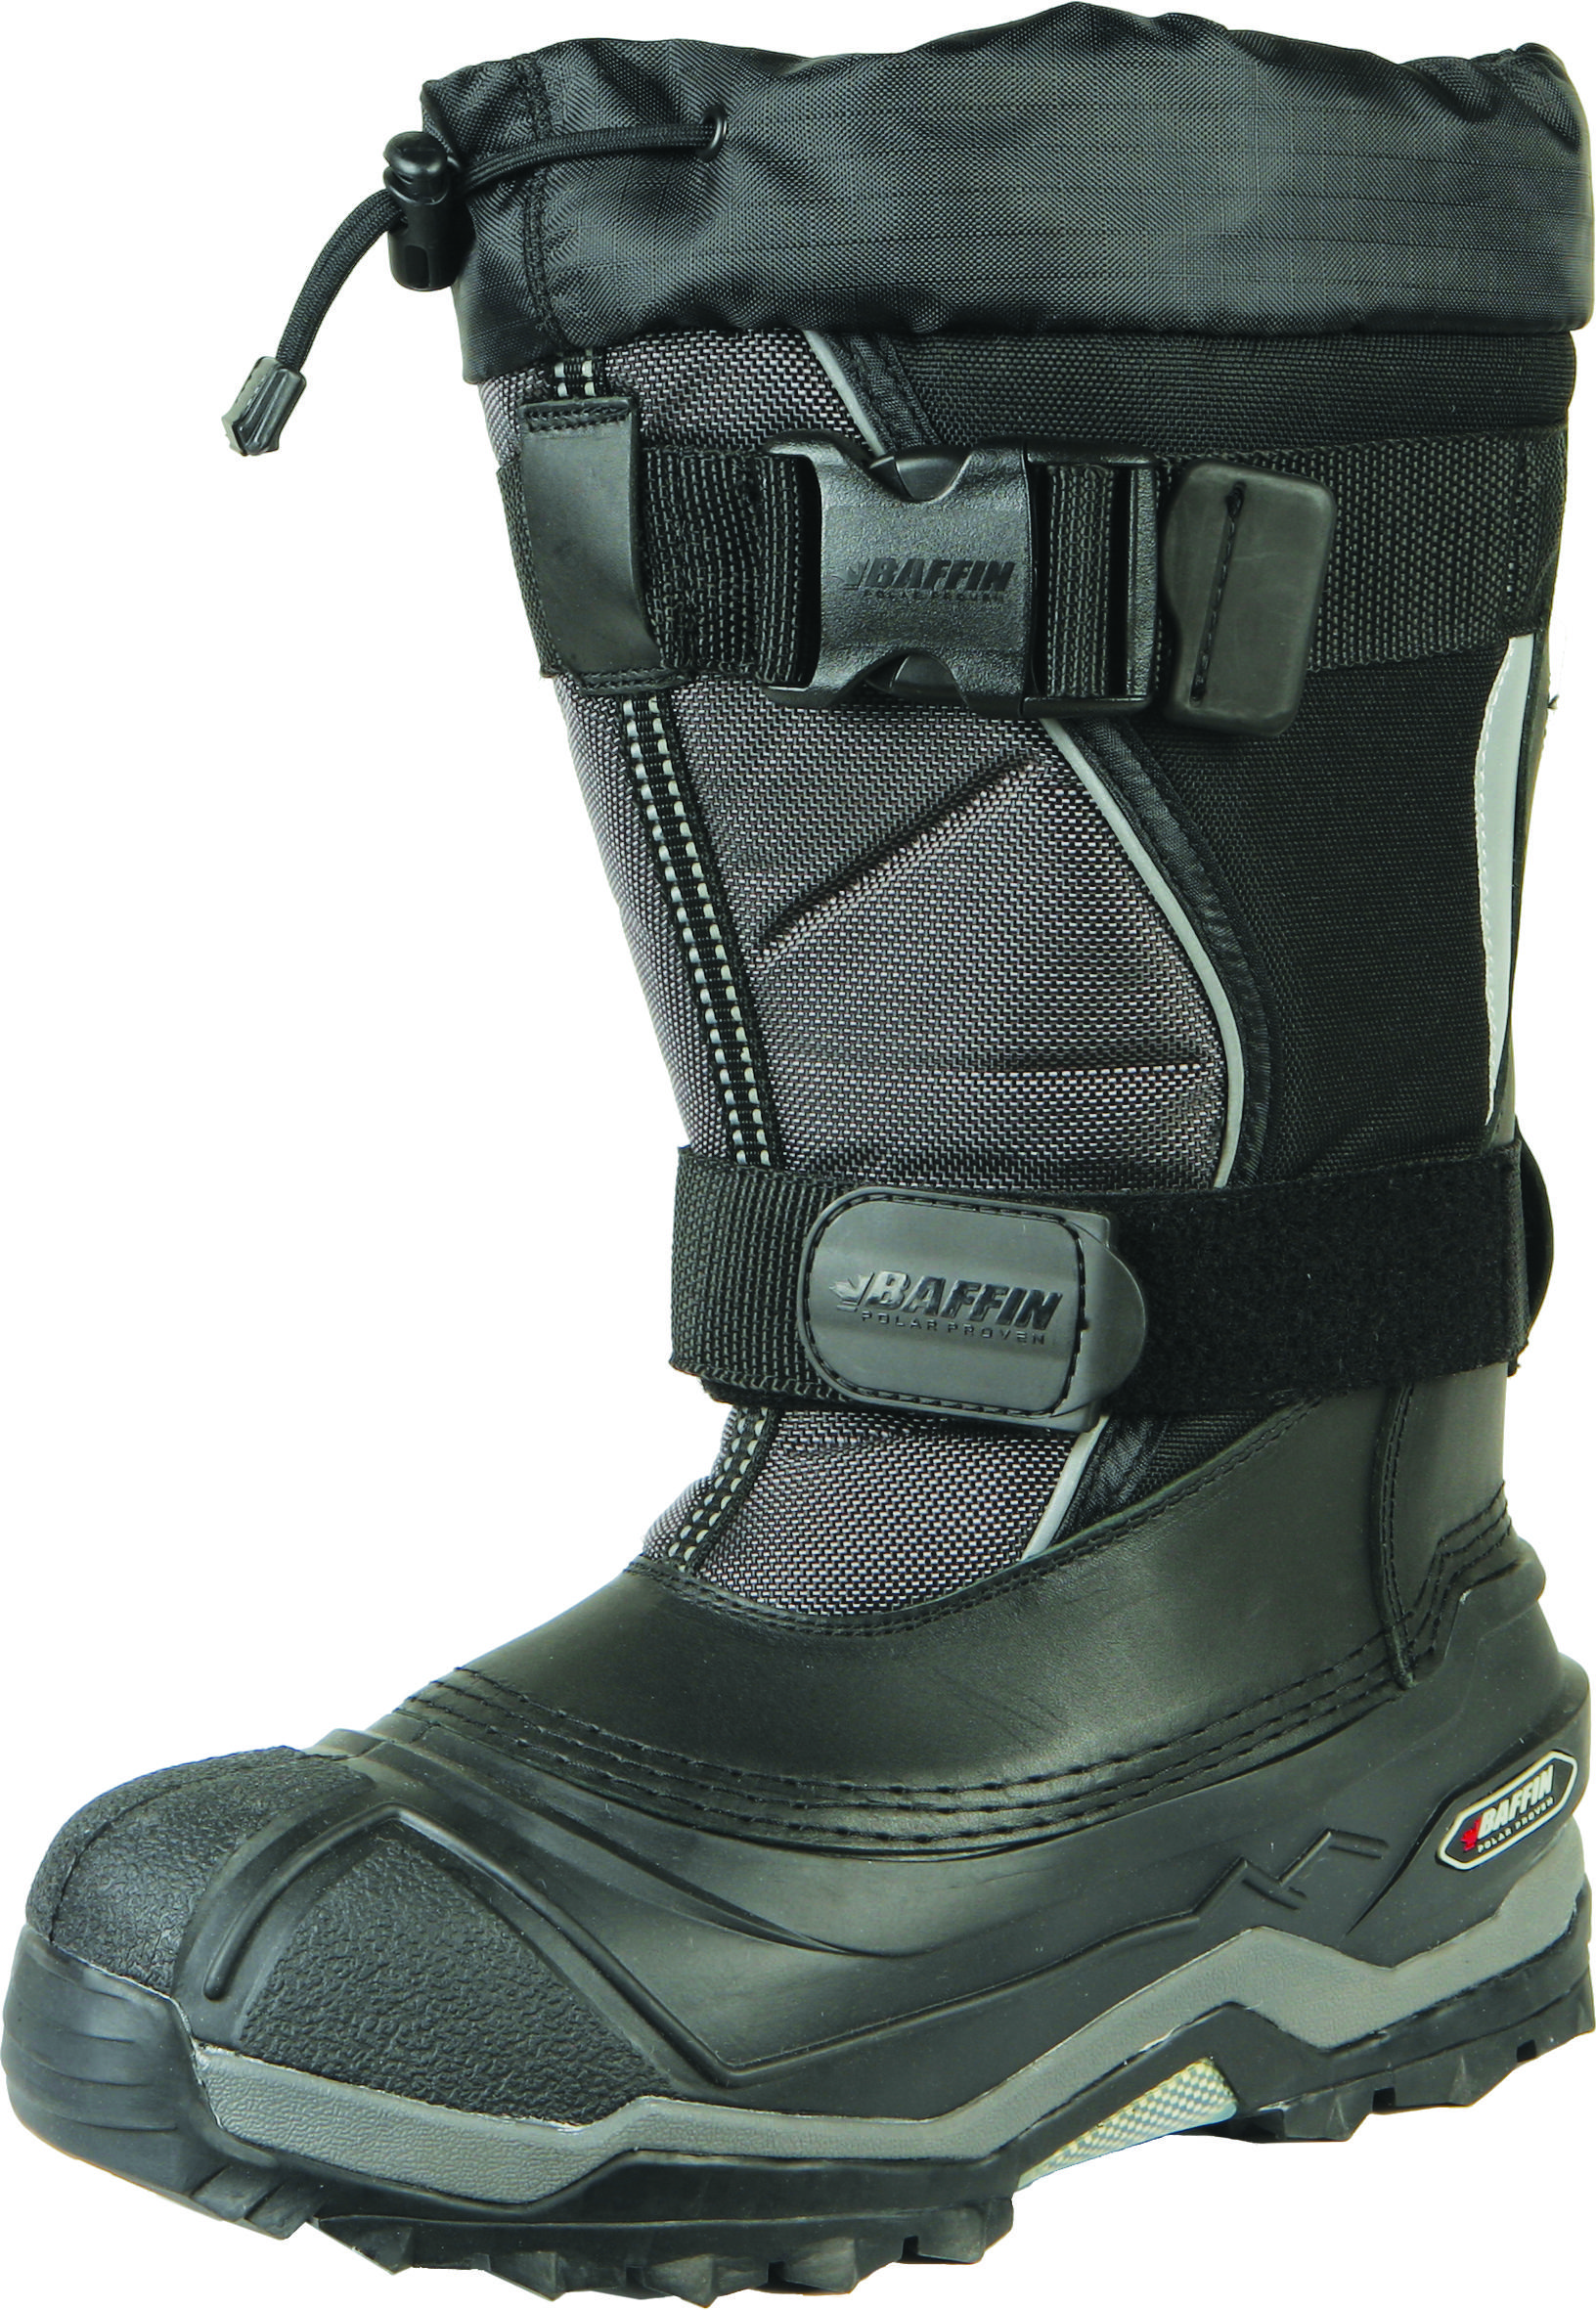 Selkirk Boots Black US 09 - Click Image to Close